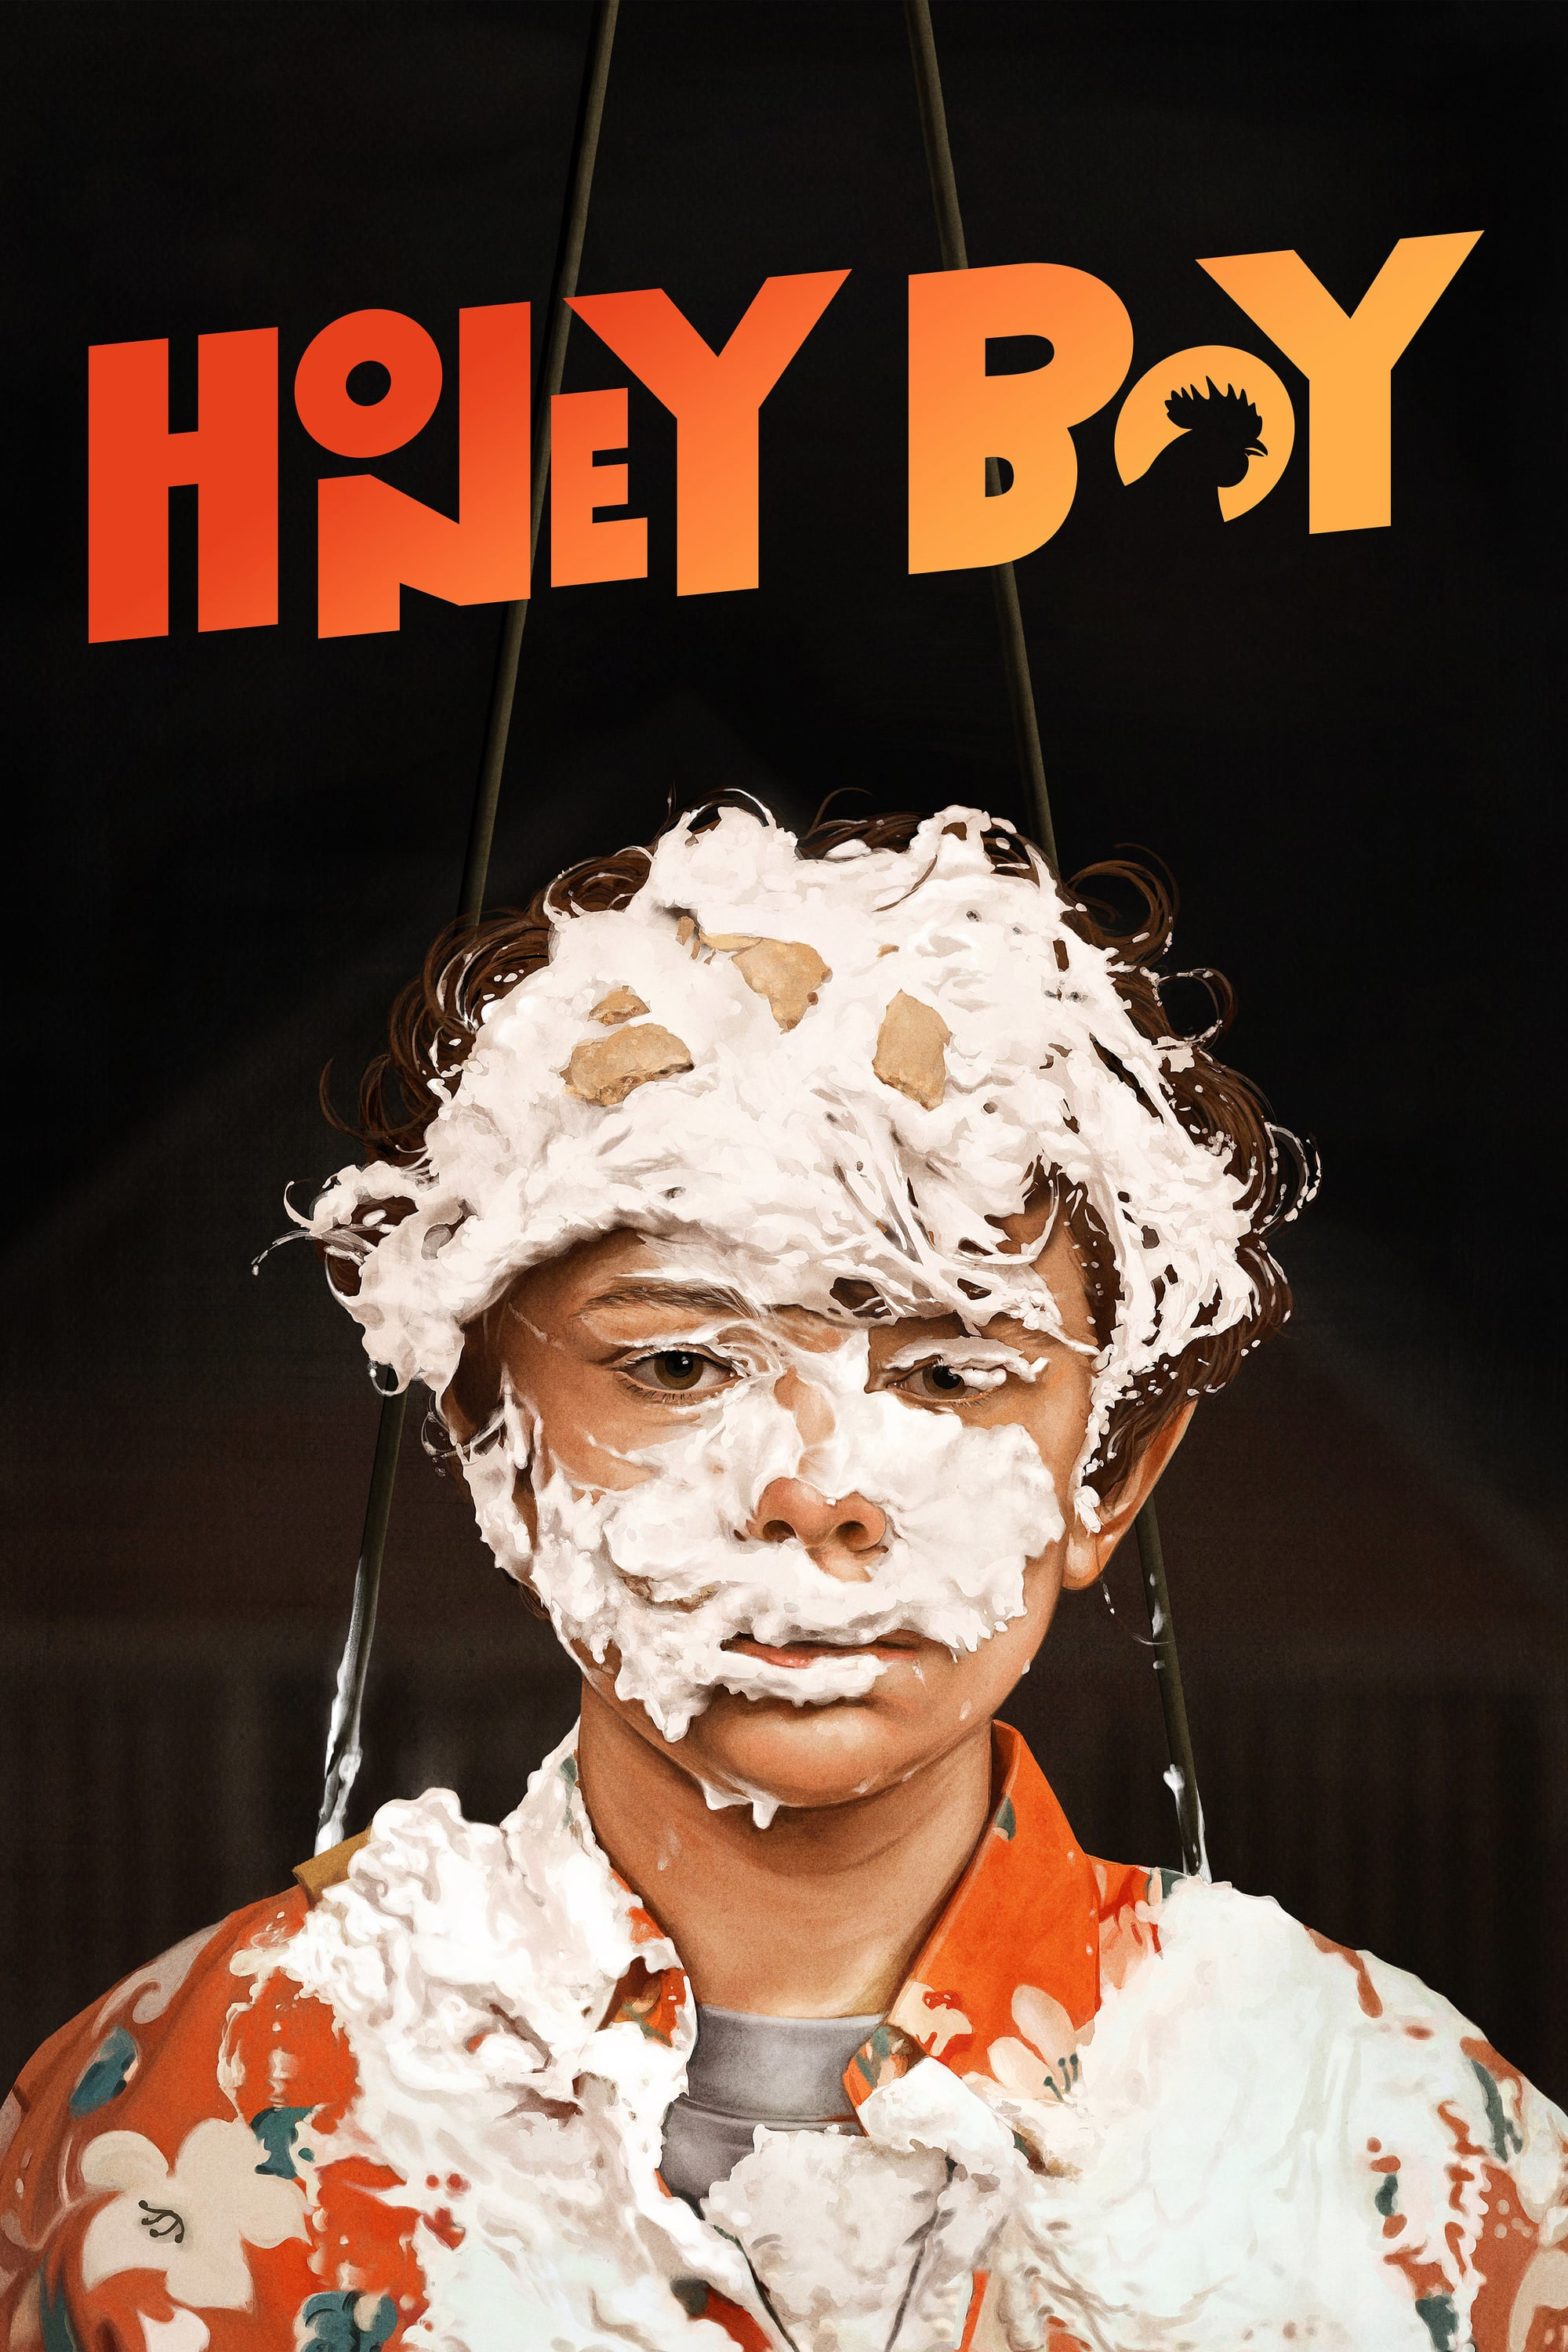 Poster for the movie "Honey Boy"